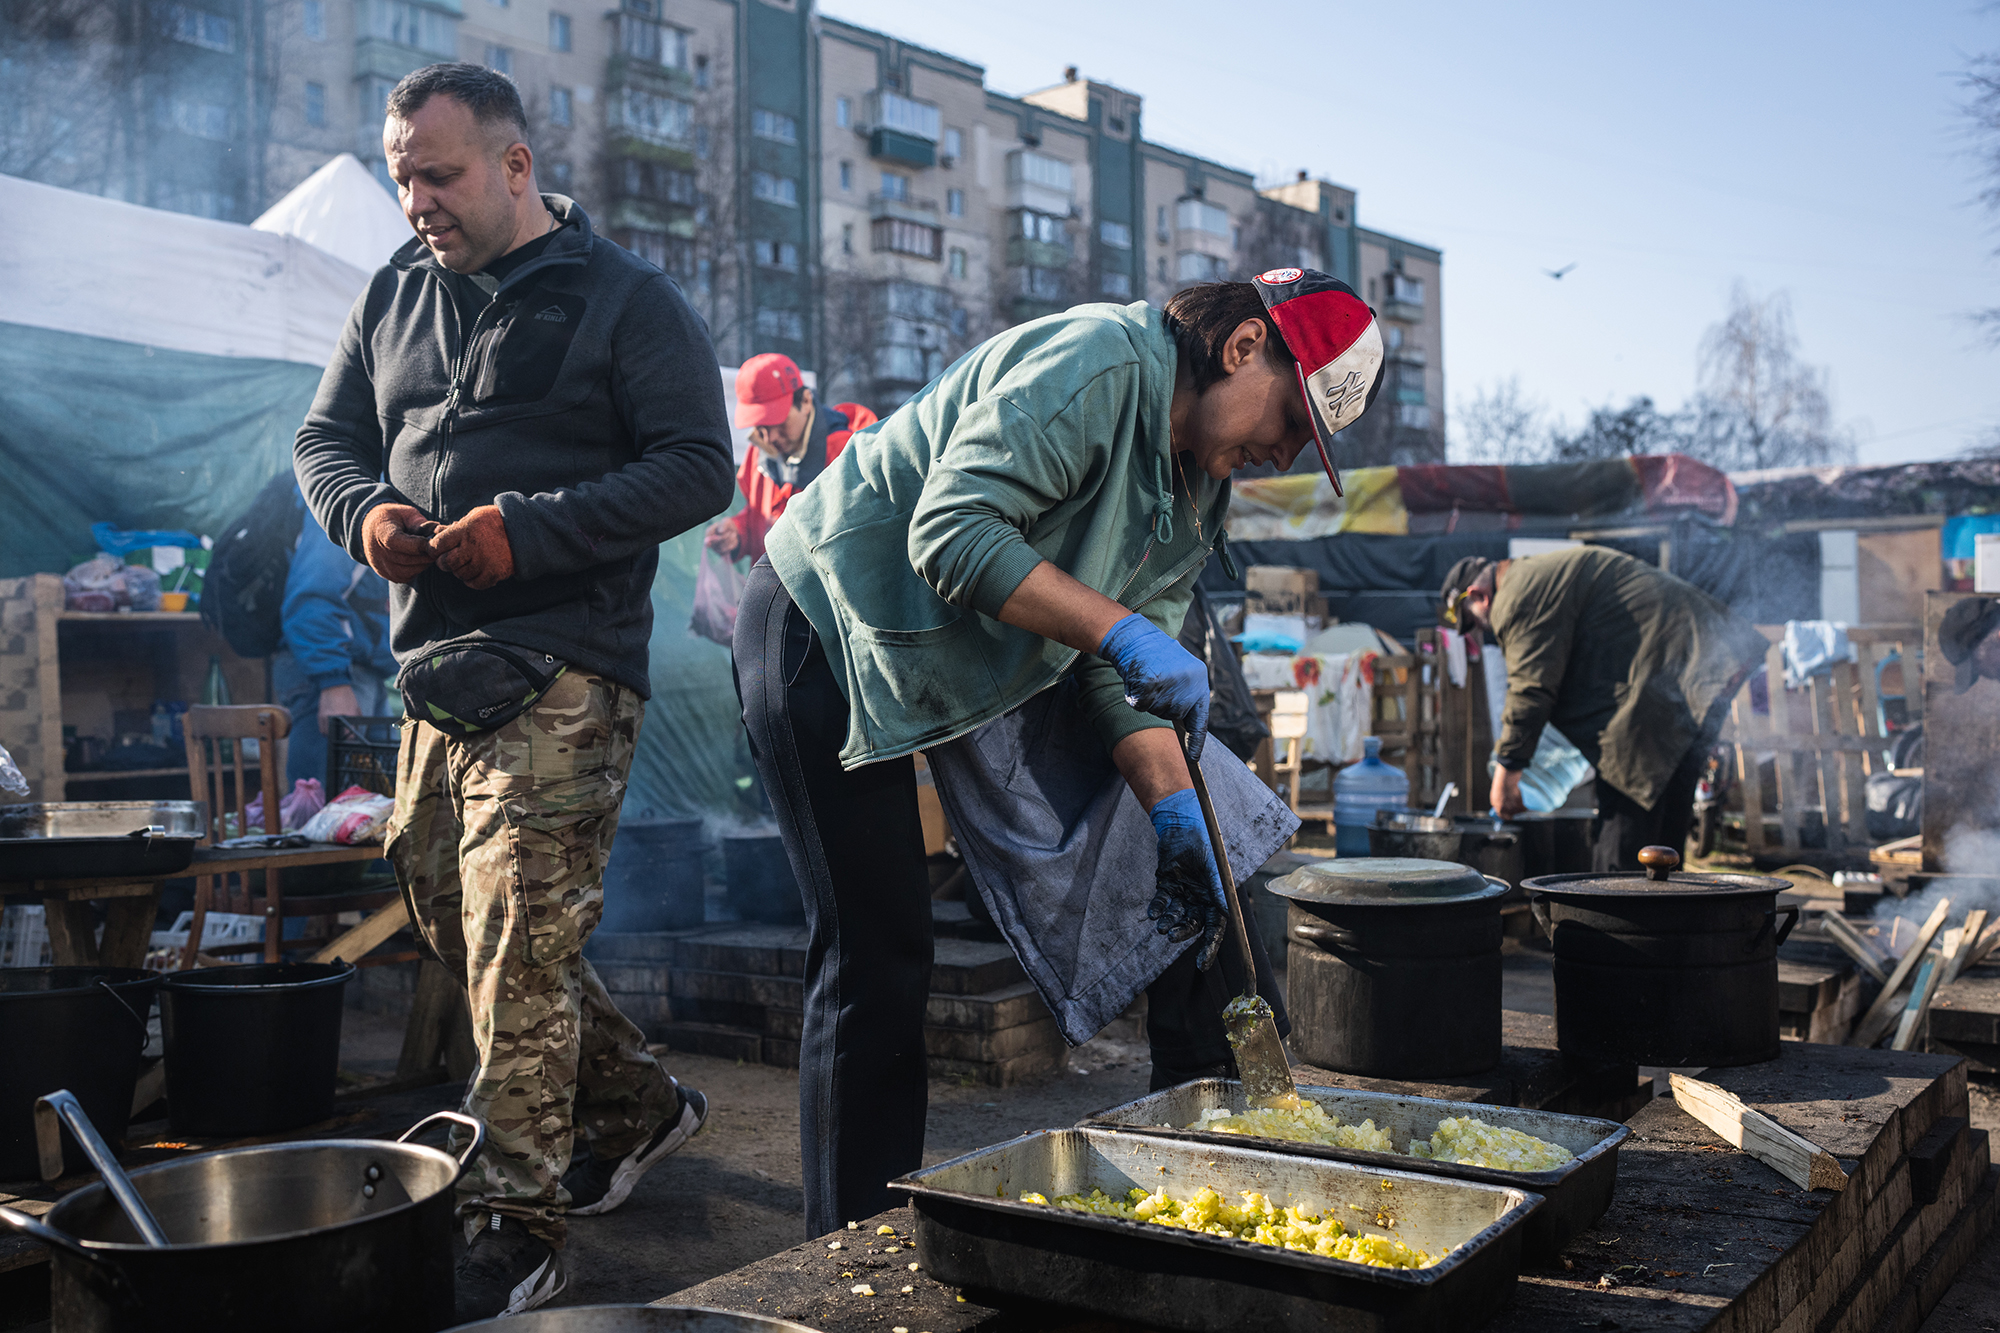 Volunteers are seen preparing and distributing food for locals and the territorial defense in Kyiv, Ukraine, on March 25.